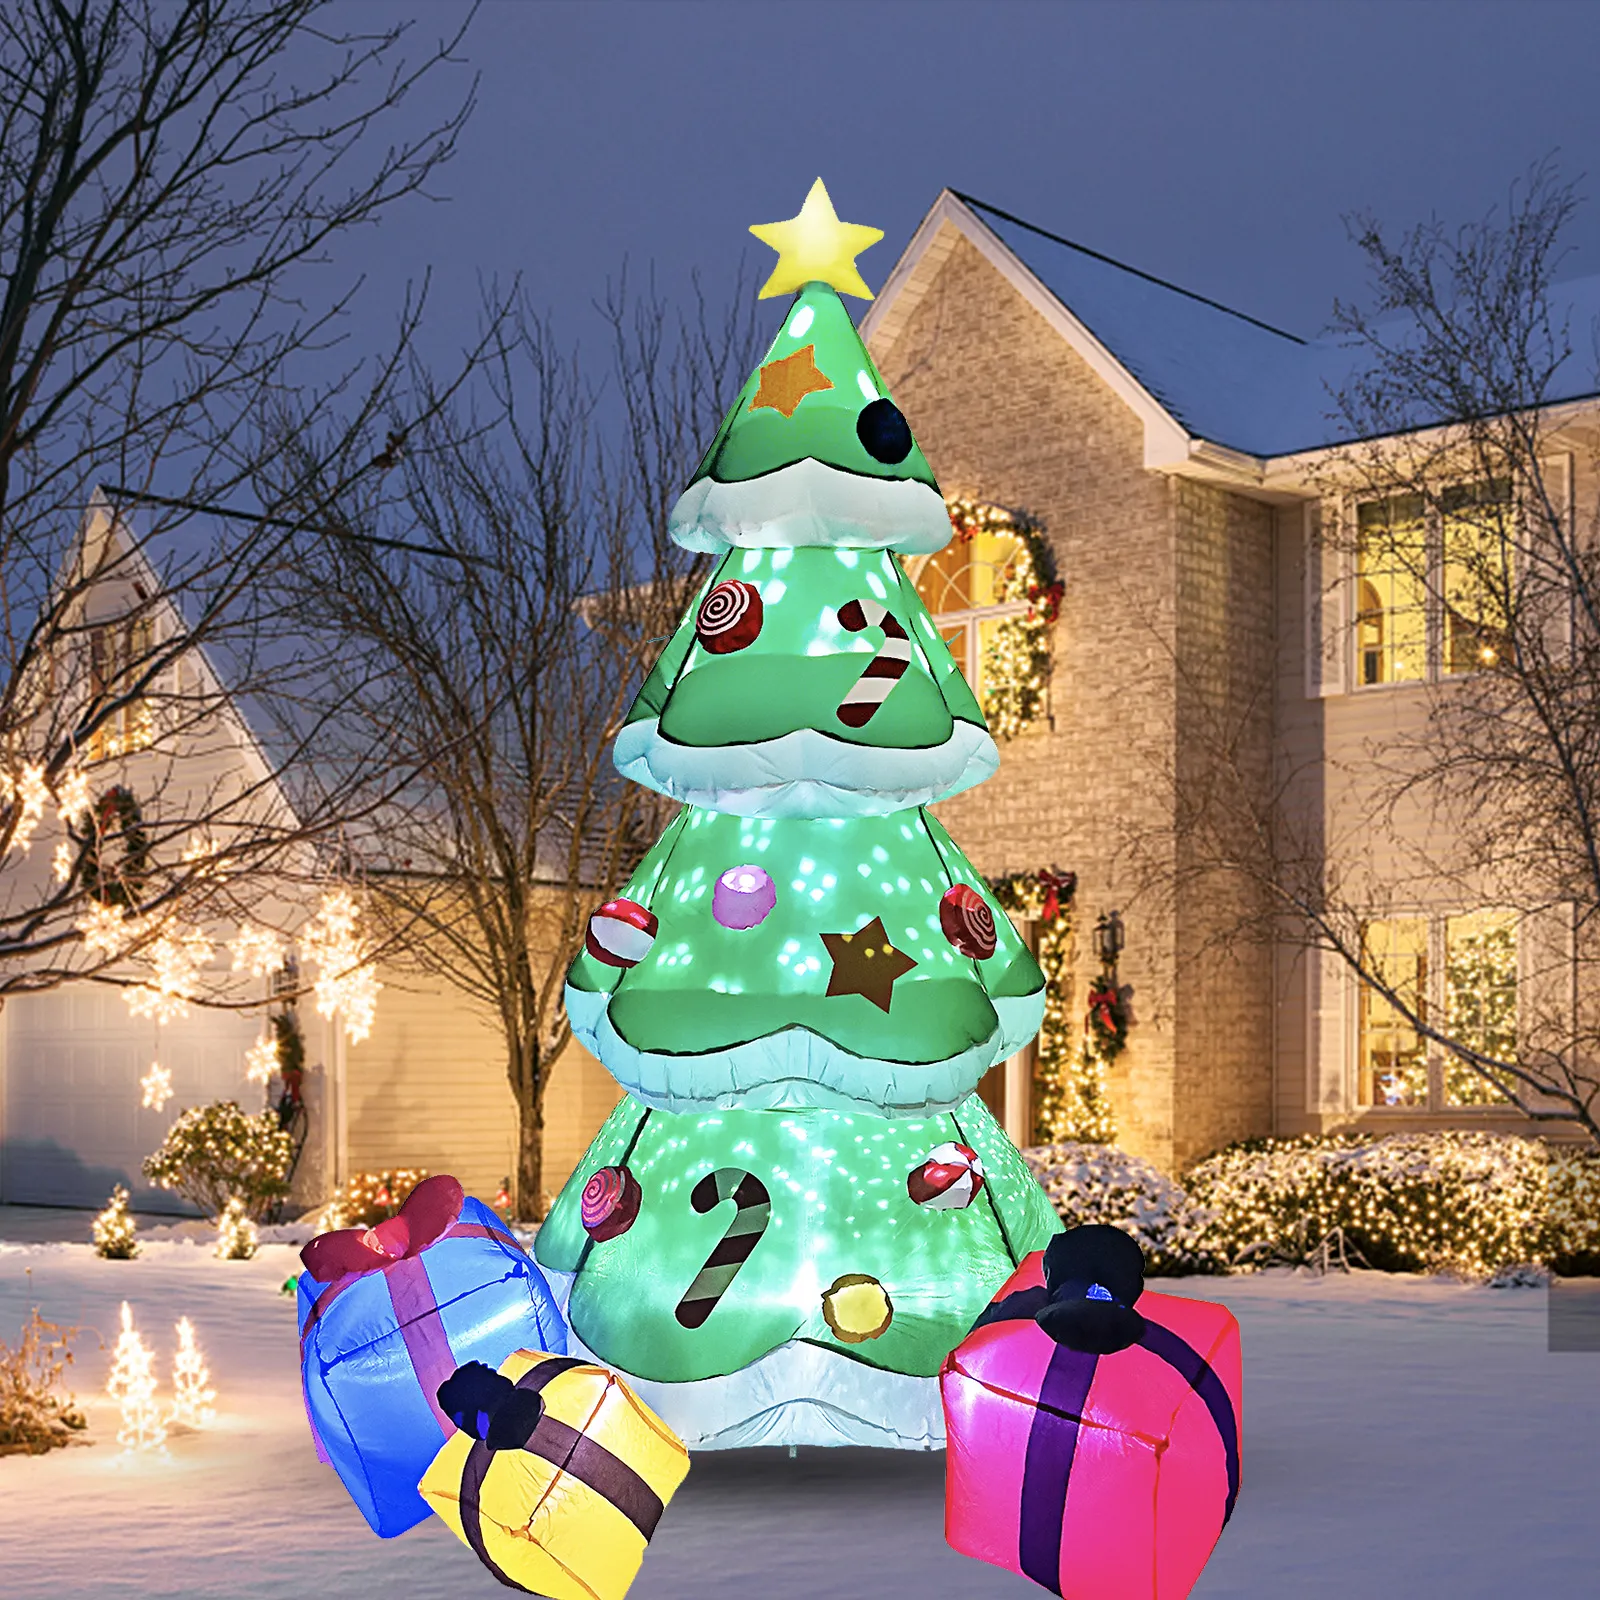 2 1m Christmas tree garden outdoor decoration RGB lighting inflatable Xmas trees inflatables model festival light props candy cane276C